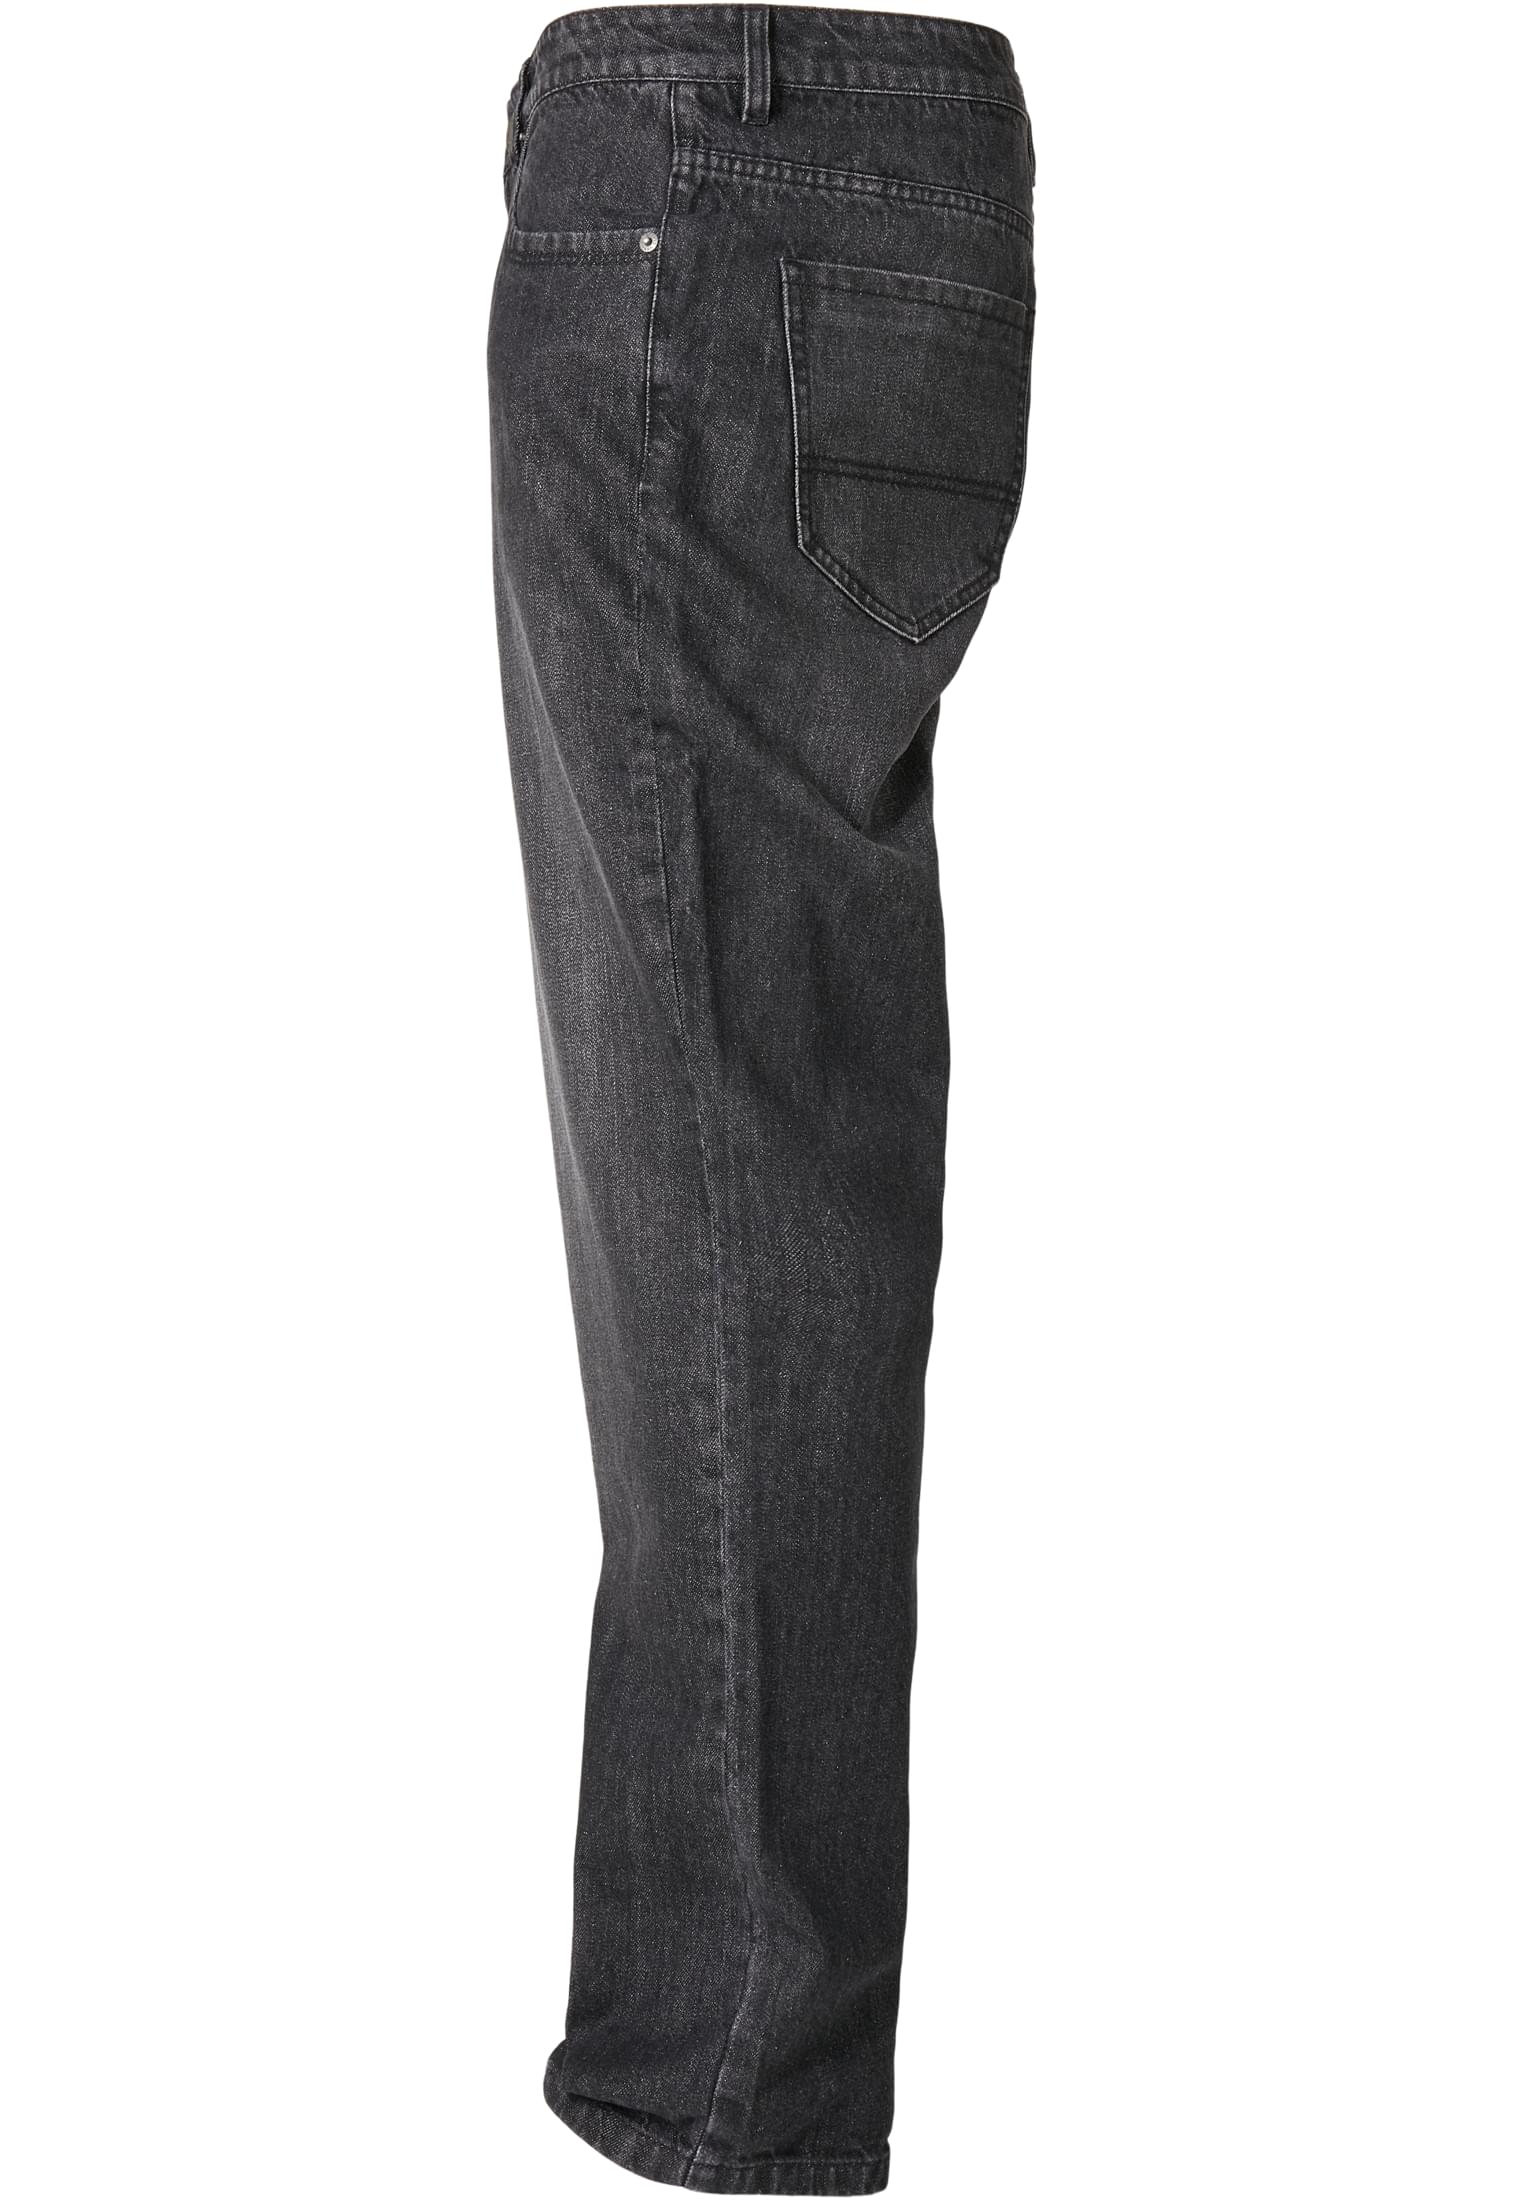 Hosen Loose Fit Jeans in Farbe real black washed